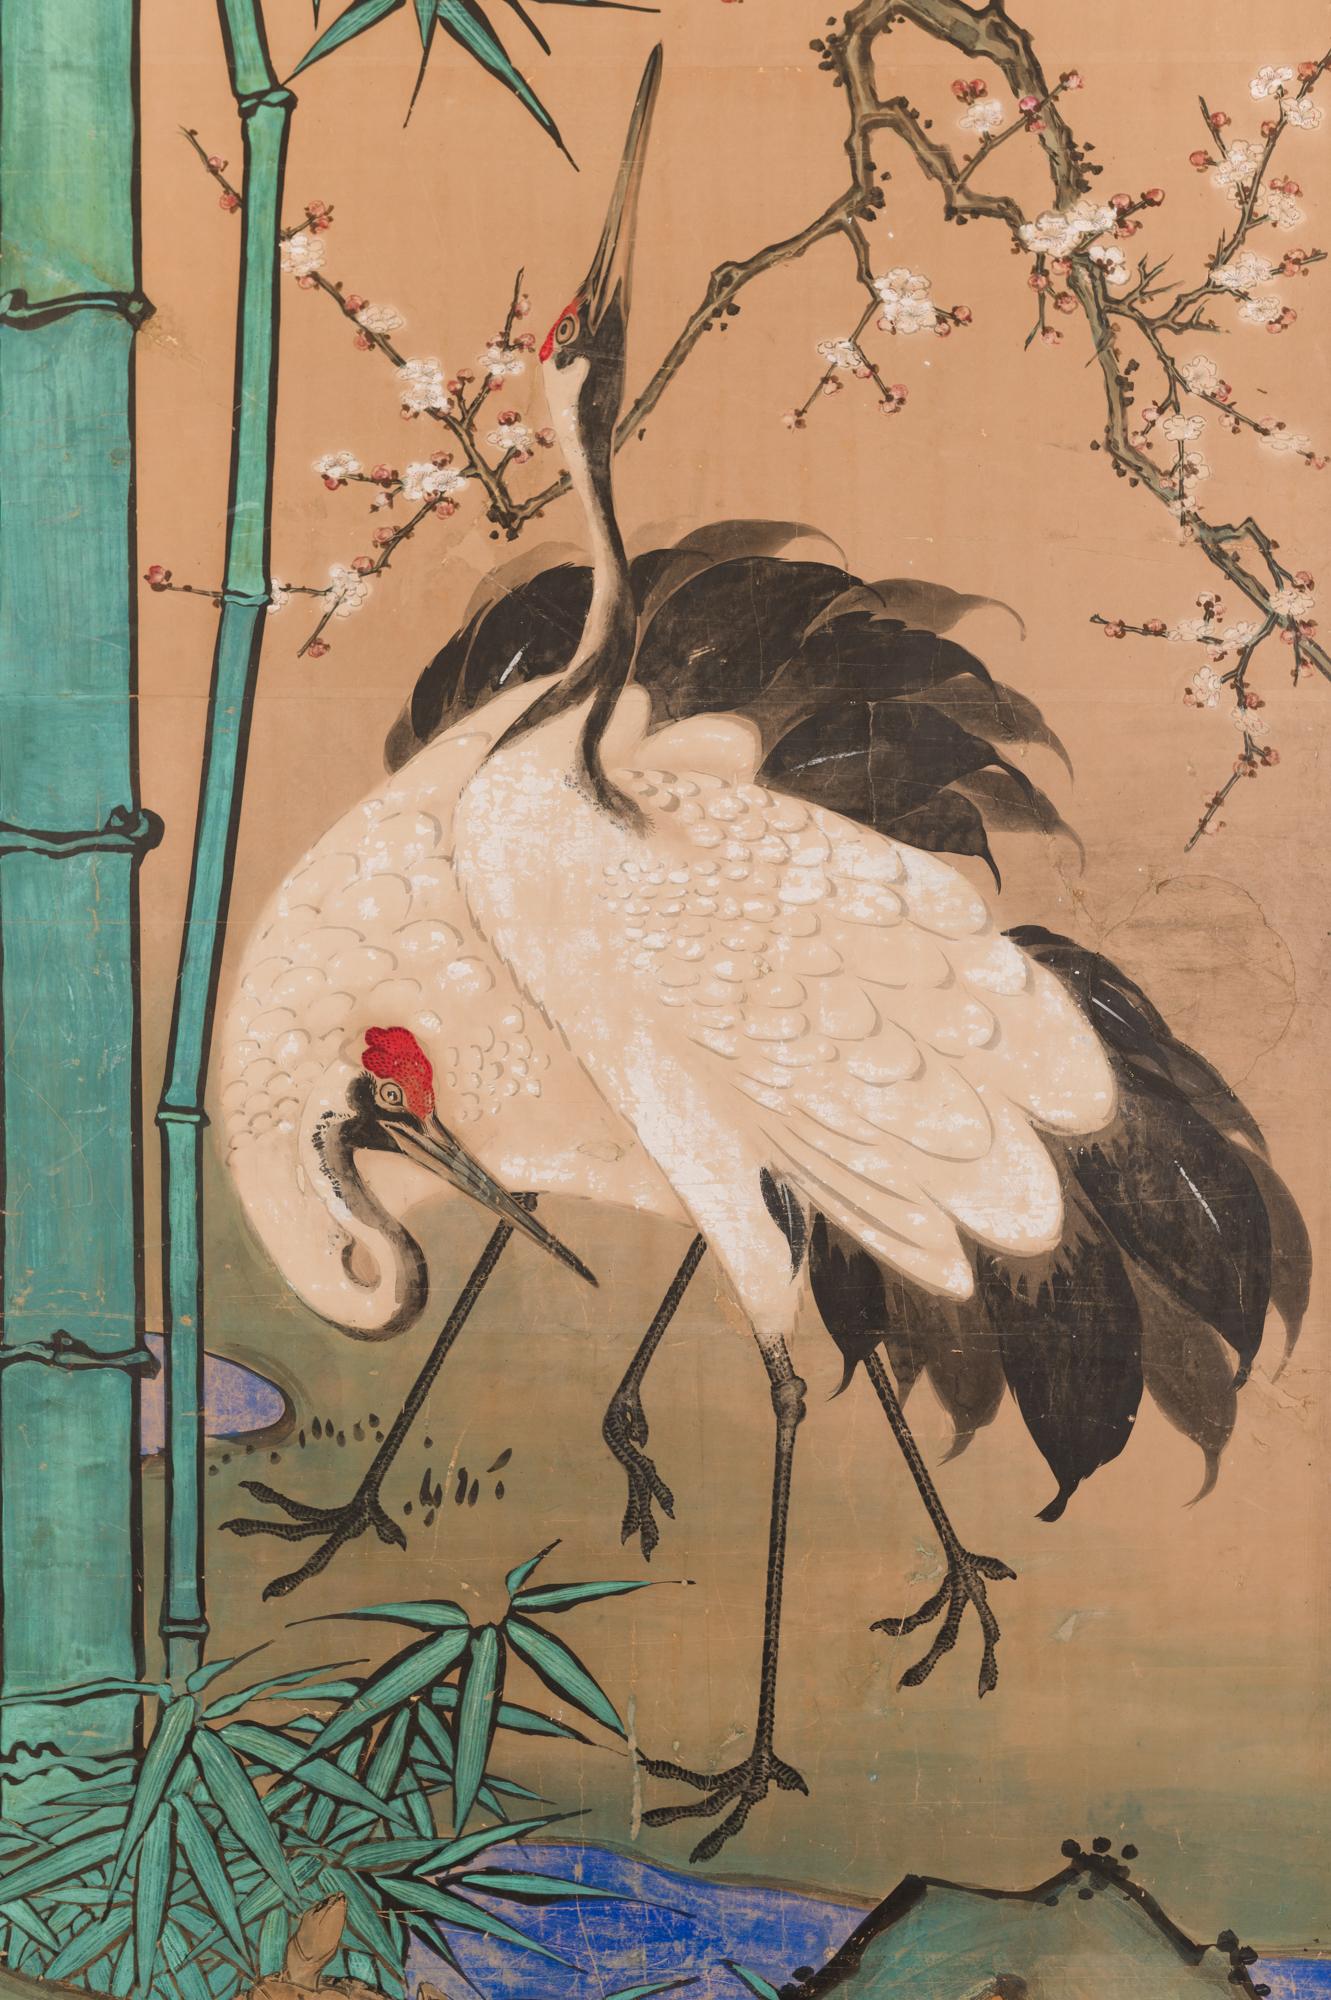 Japanese two panel screen: Amorous Cranes and Turtles. In Japan, cranes symbolize fidelity as they mate for life and turtles symbolize longevity. Additionally, this screen also has the Japanese motif of sho-chiku-bai, or the three friends of winter